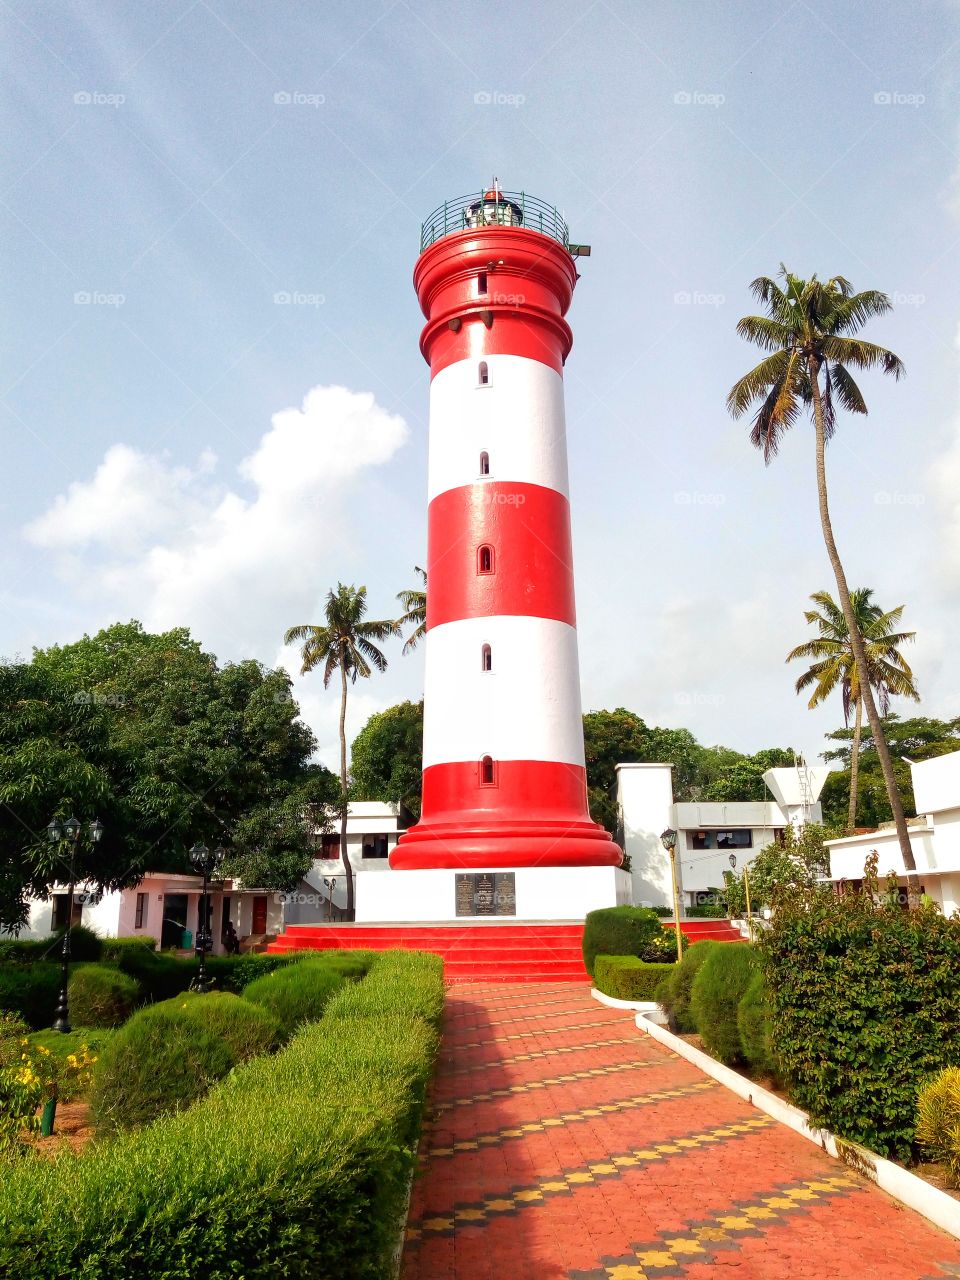 The Alappuzha Lighthouse (or Alleppey Light) is situated in the coastal town of Alappuzha, Kerala. It was built in 1862 and is a major tourist attraction.This is the first of its kind in the Arabian sea coast of Kerala.Alappuzha,Kerala,India